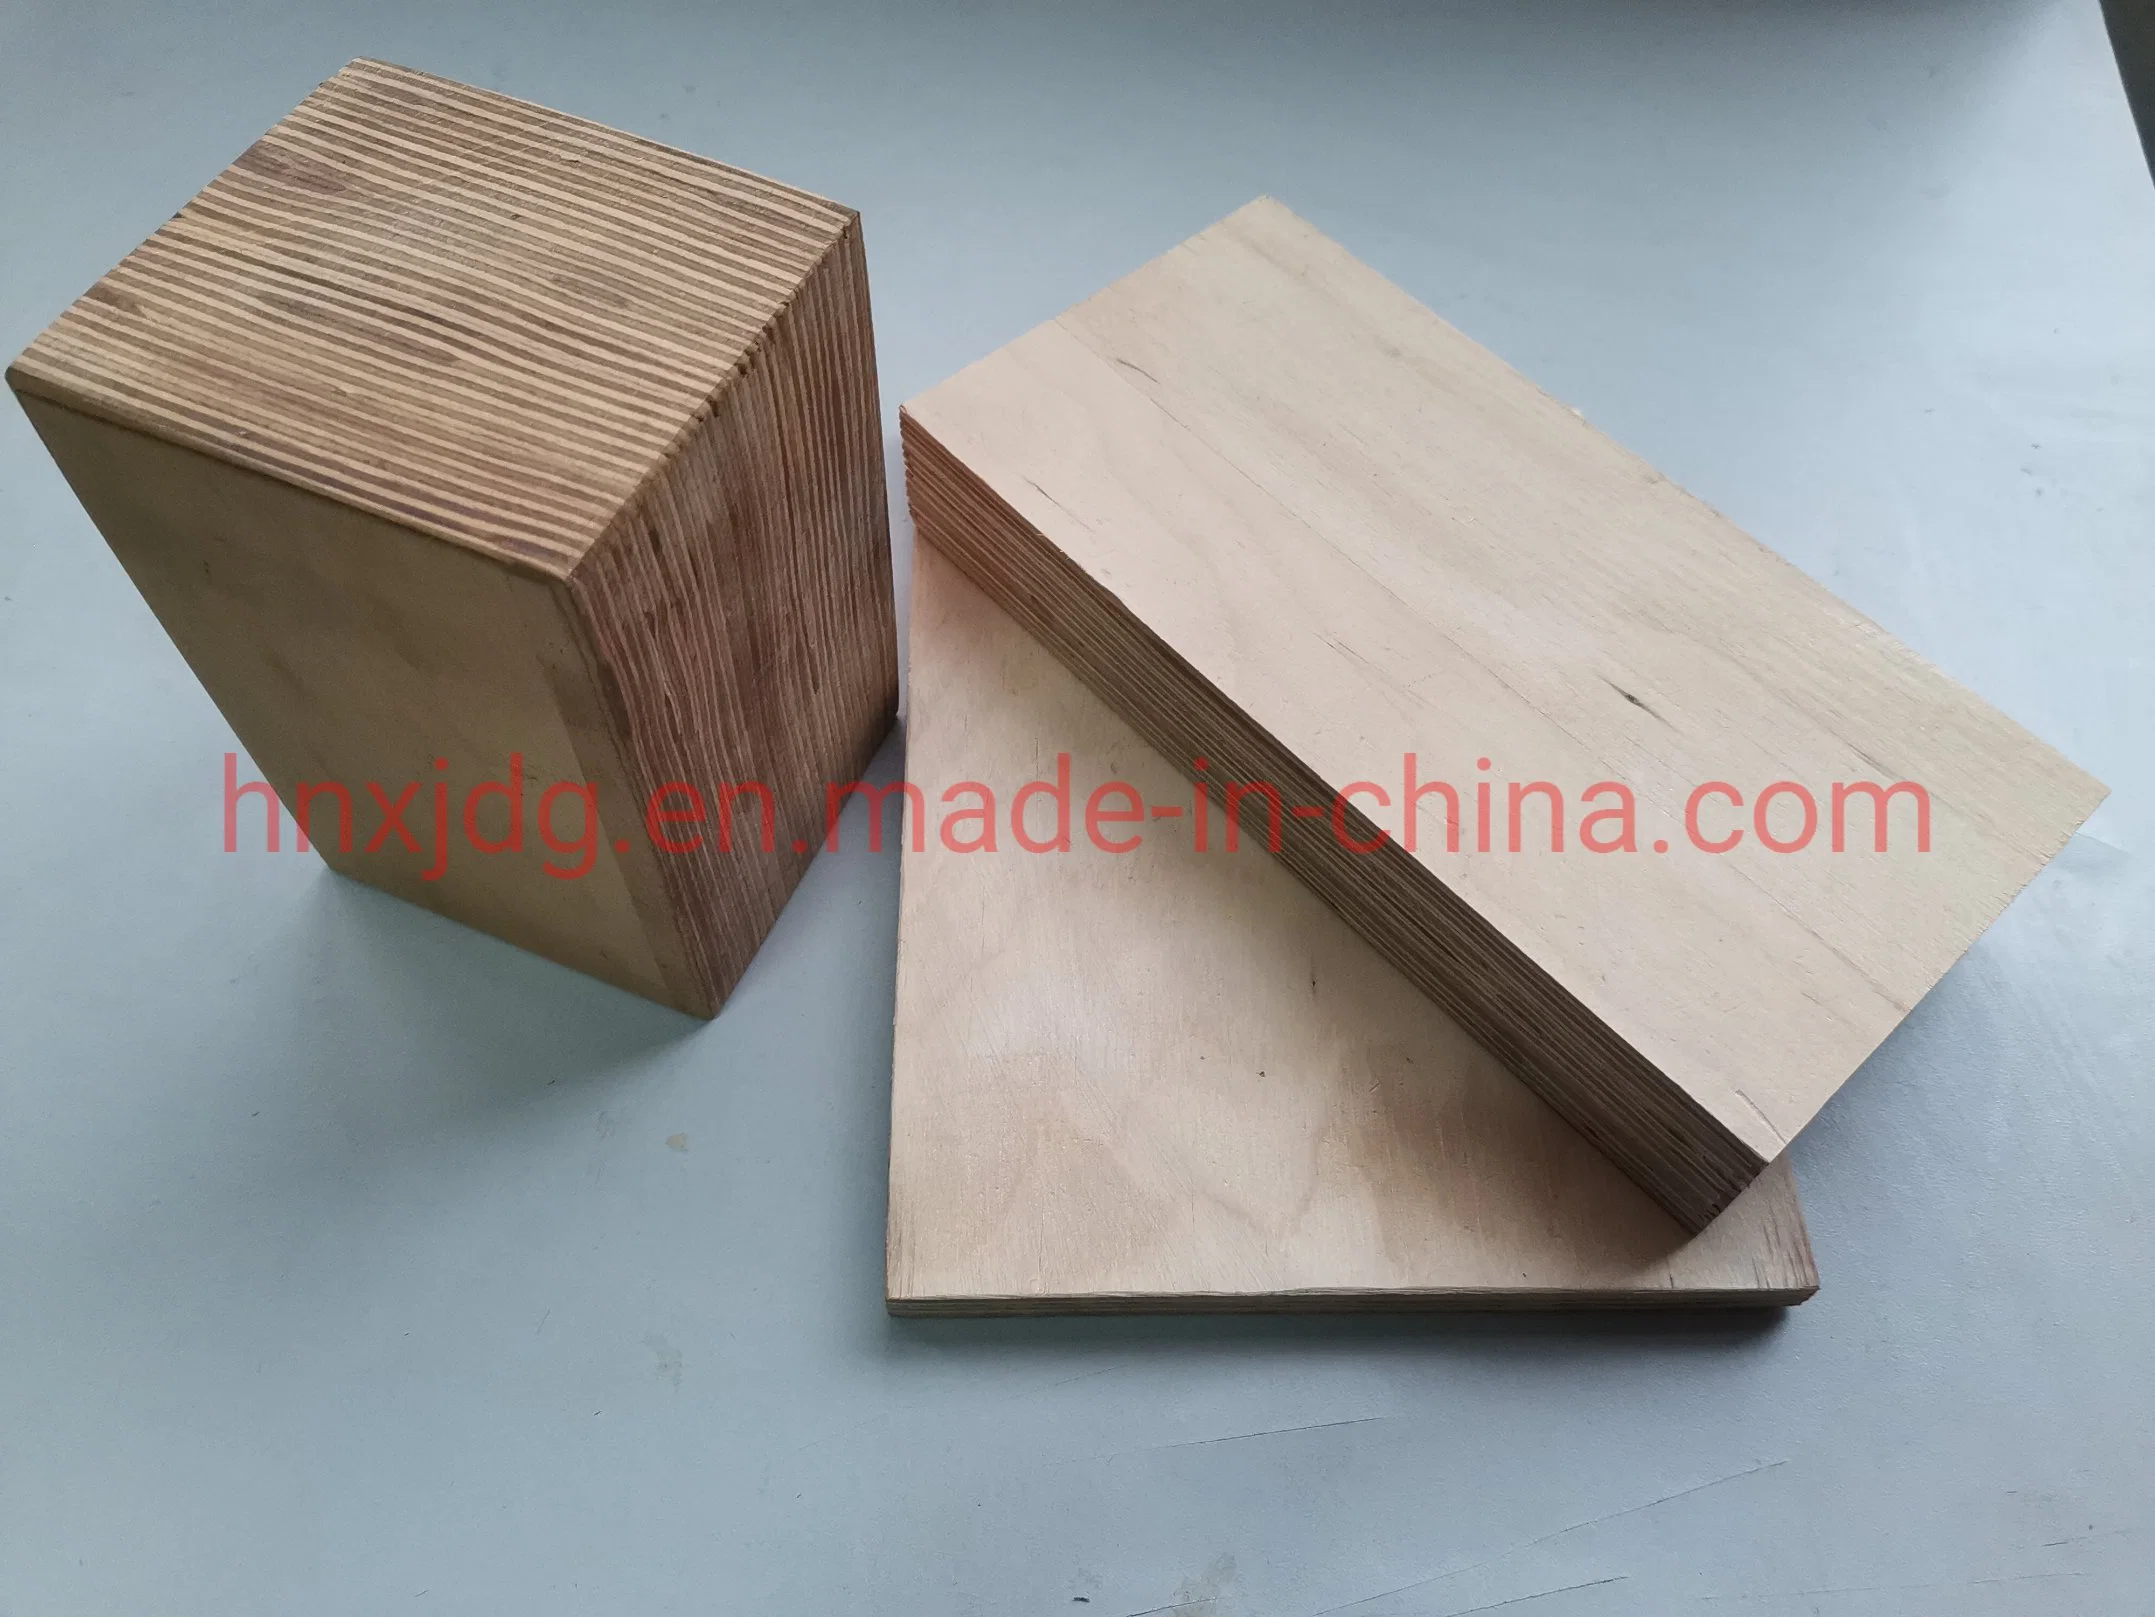 Insulation Materials High Voltage and Thermal Resistance Plywood or Wood Laminated Sheets/Boards for Transformer